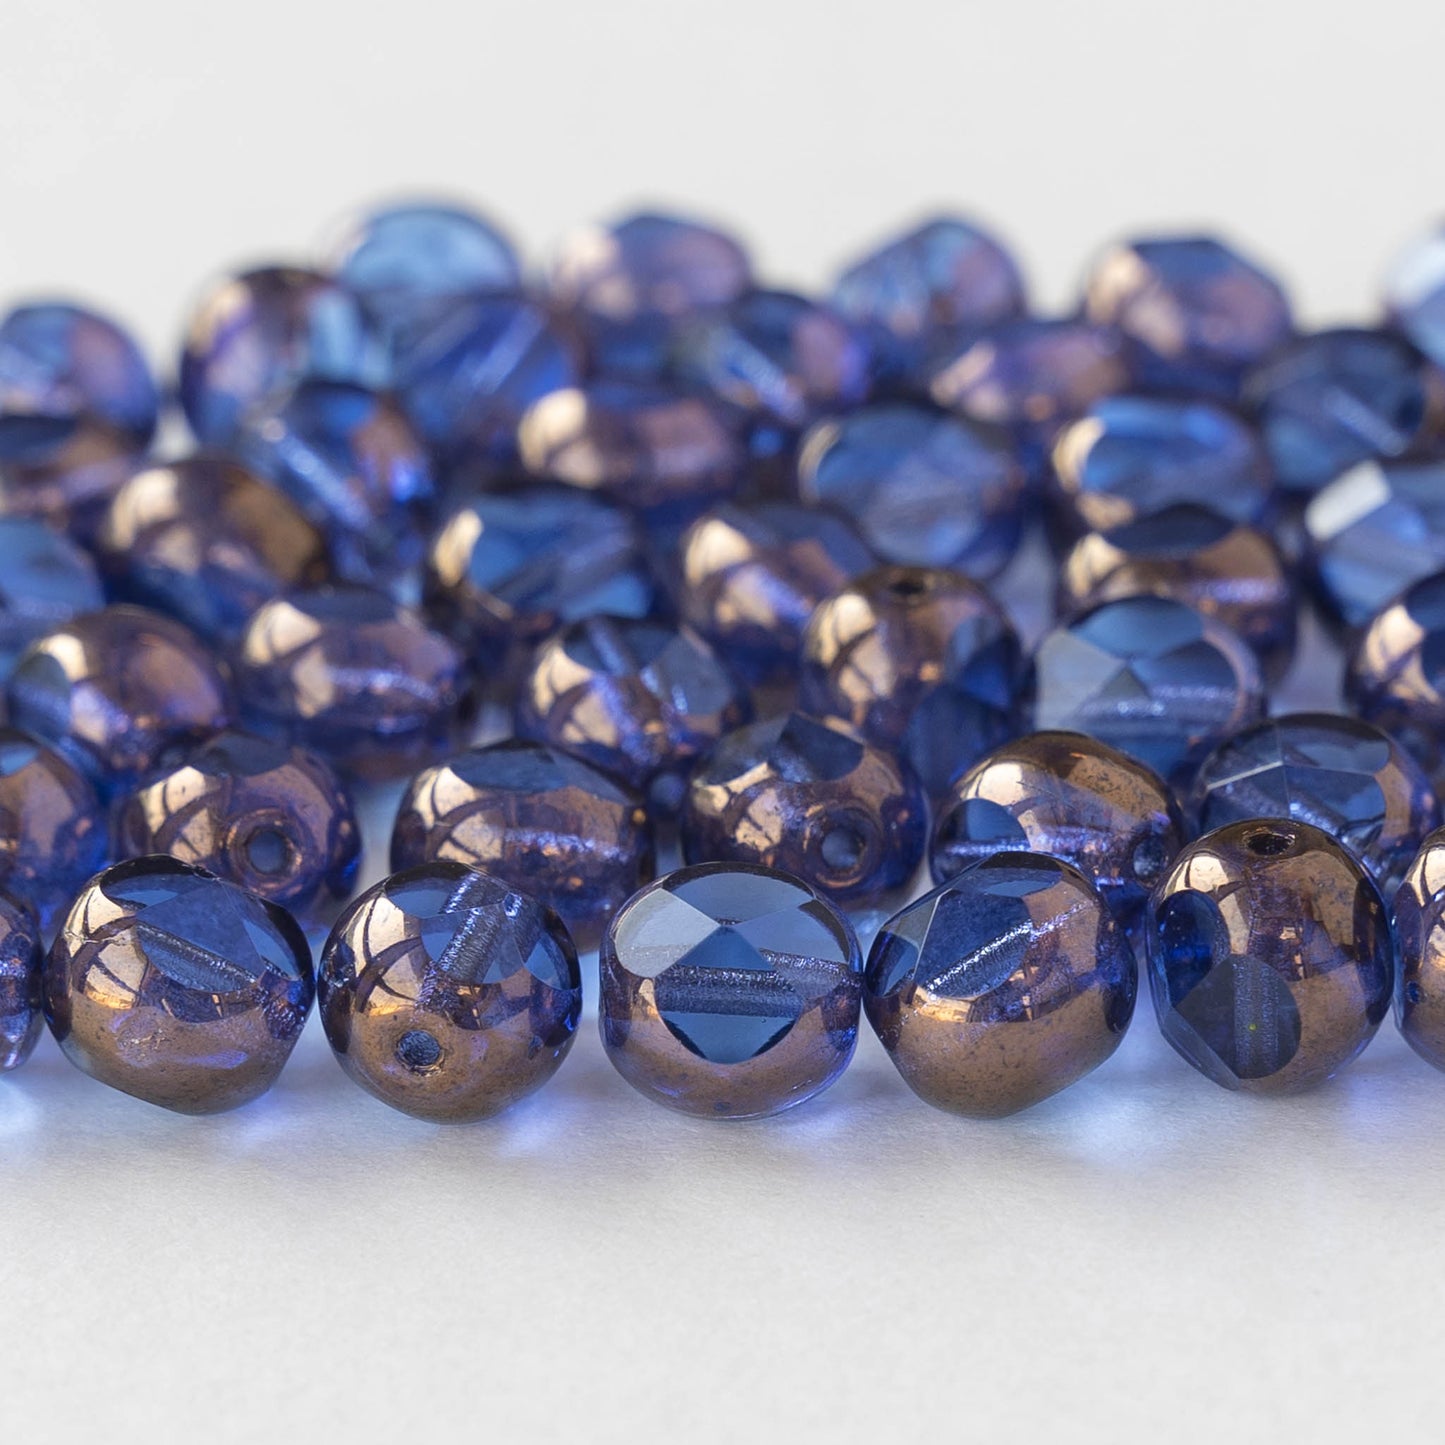 8mm Faceted Round Beads - Sapphire Blue with Bronze - 6 beads